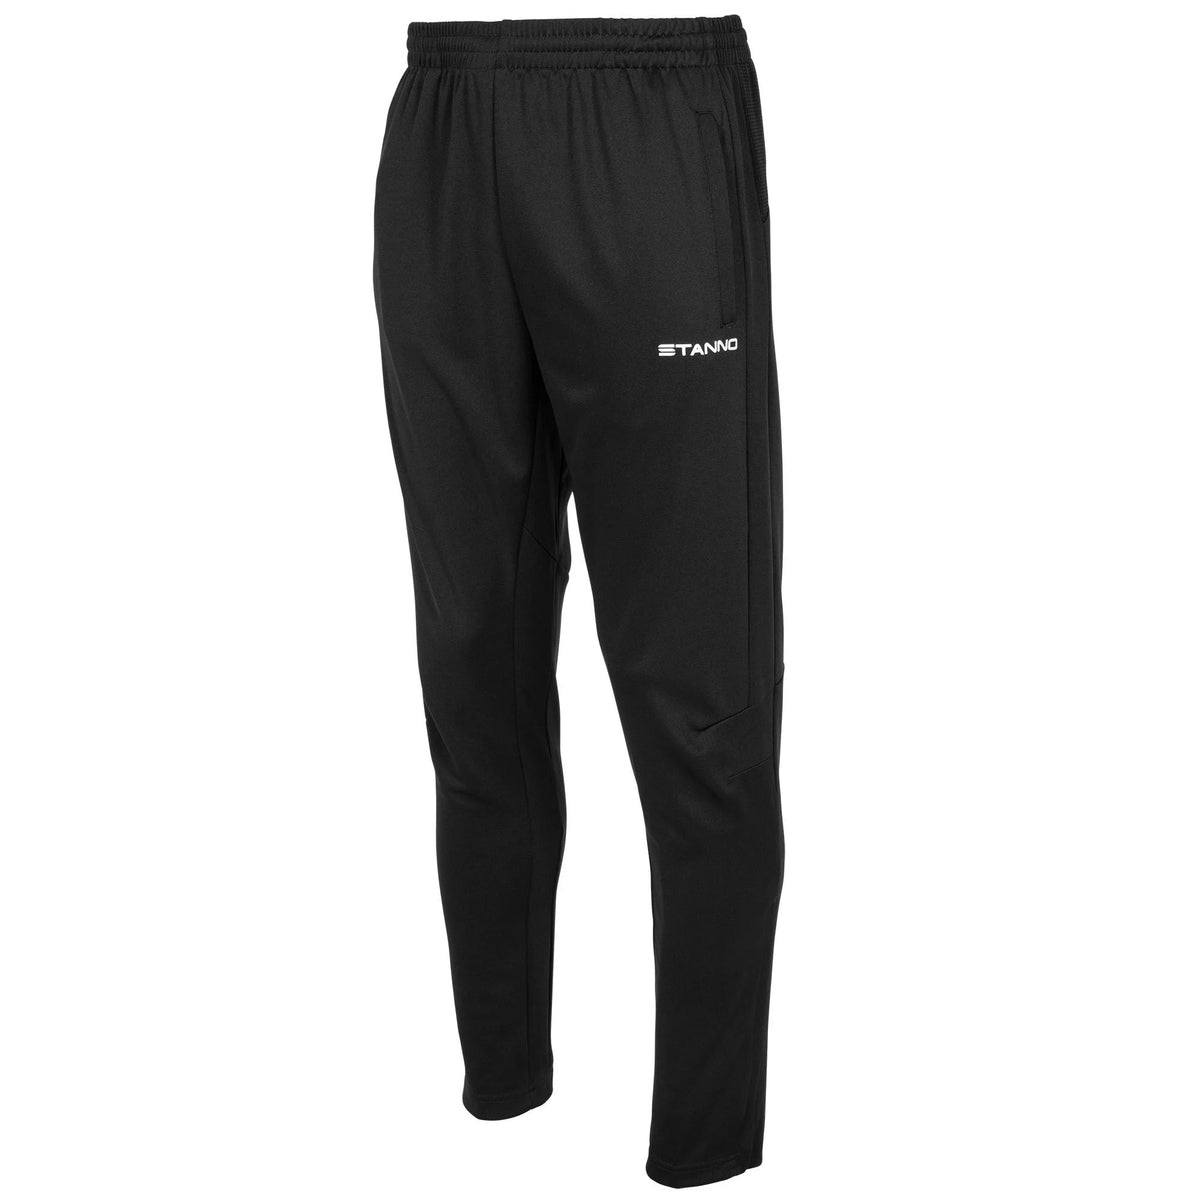 Rocklands Youth FC Stanno Pride Tracksuit Bottoms in Junior